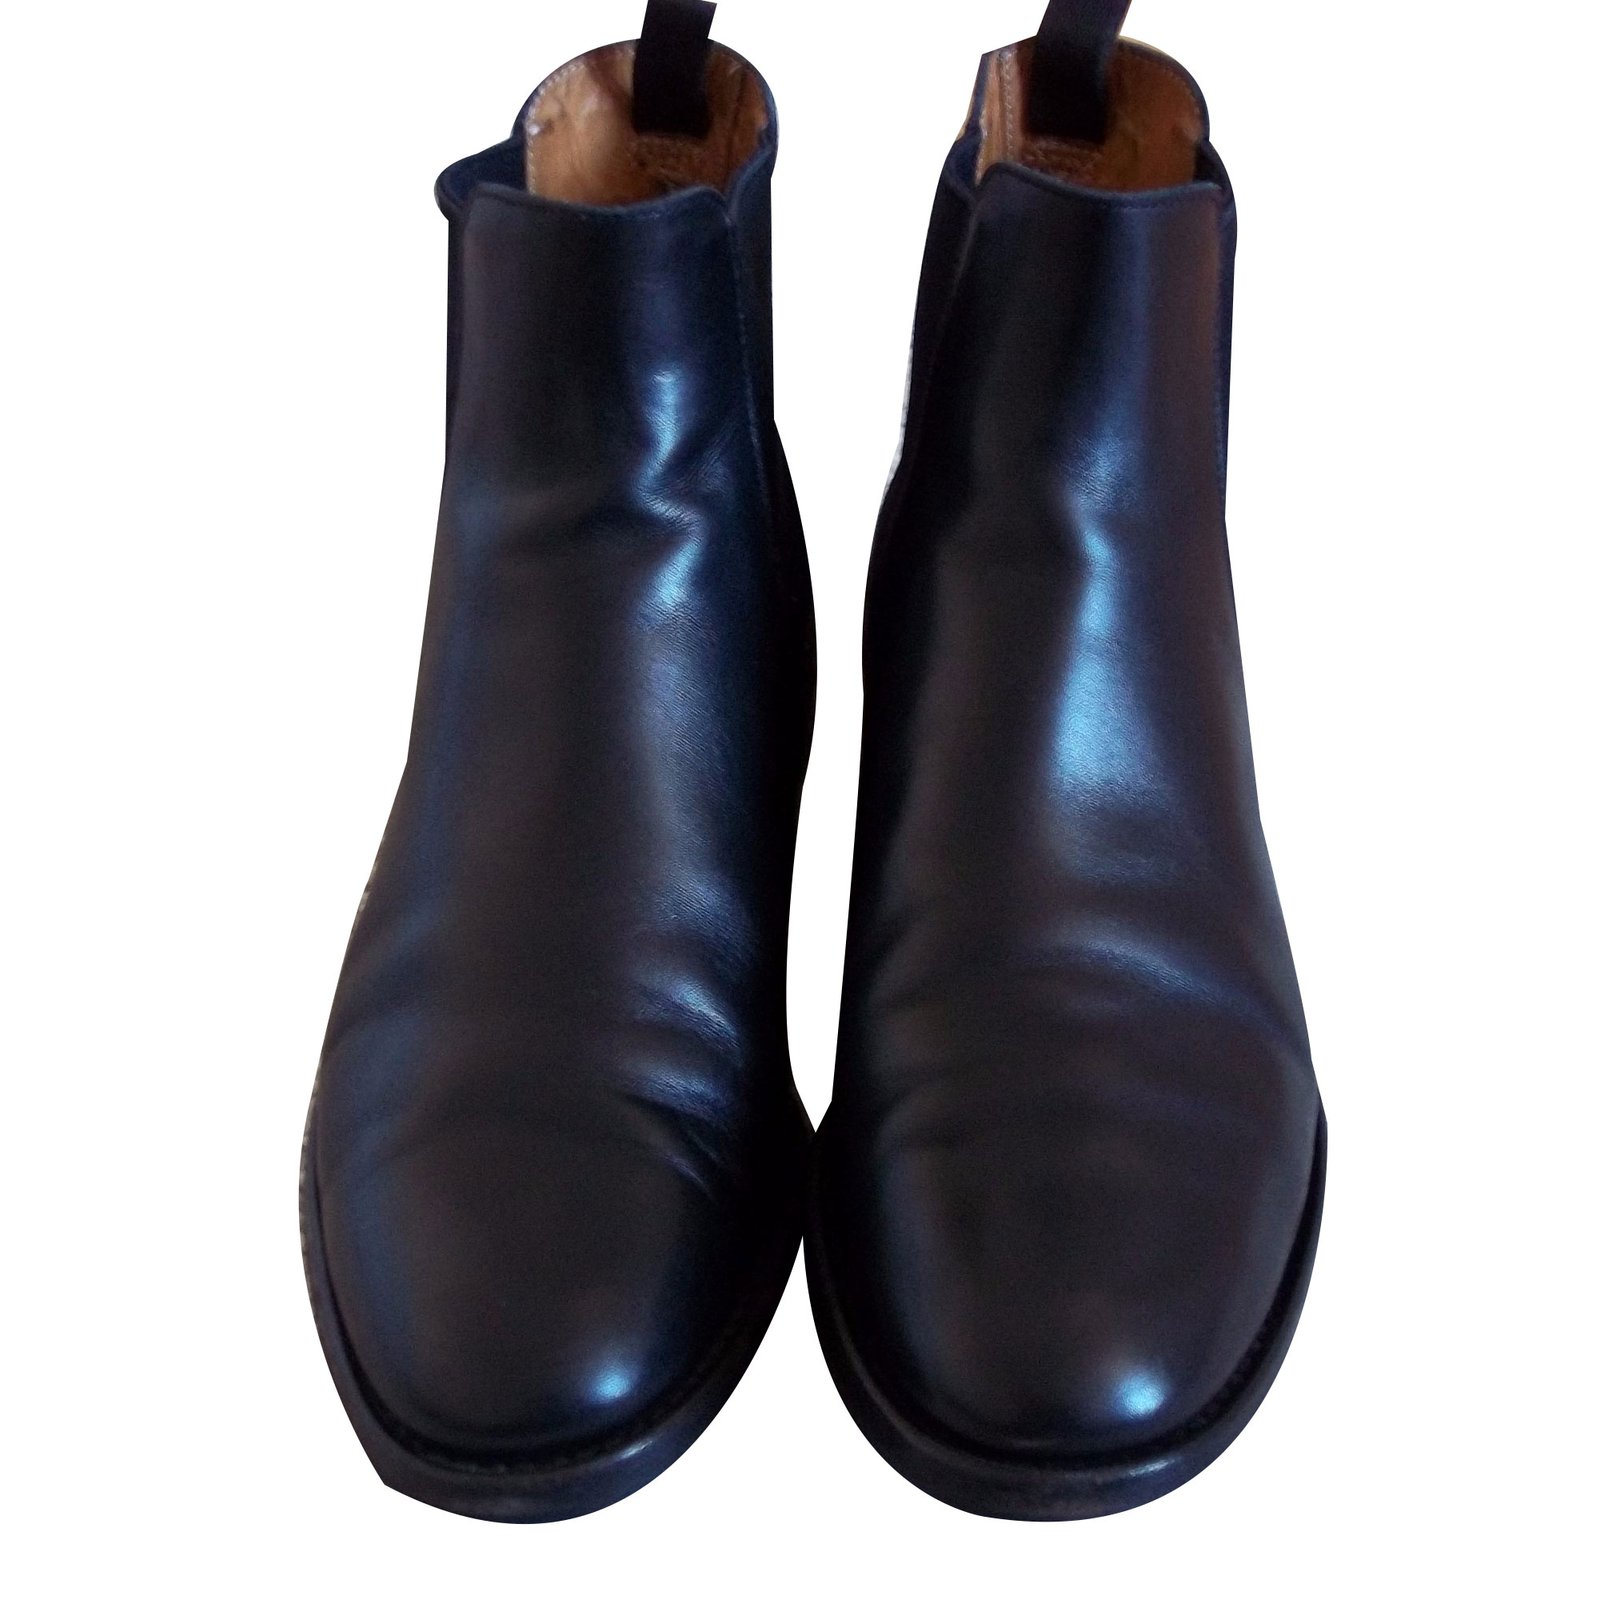 church's monmouth chelsea boots